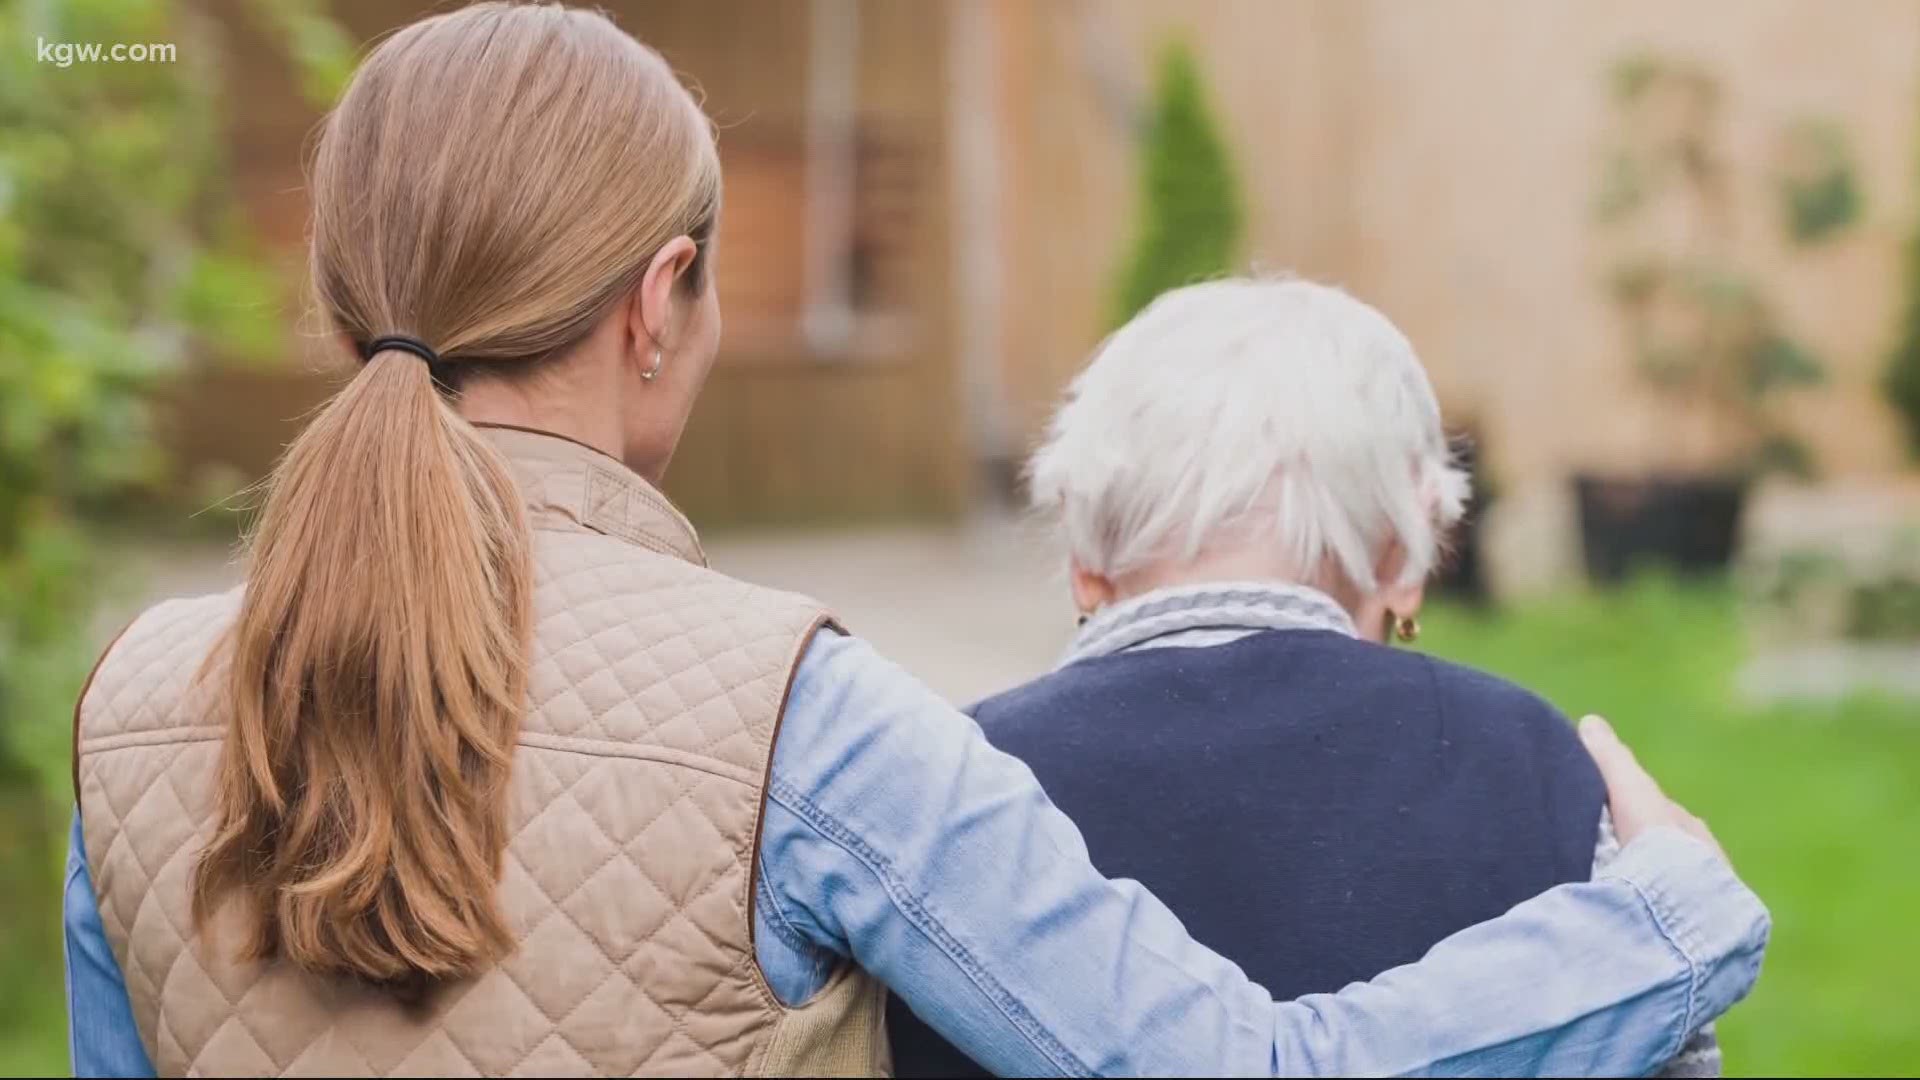 Social distancing is one of the most important tools in fighting COVID-19, but families are seeing the effects that isolation is having on their older loved ones.